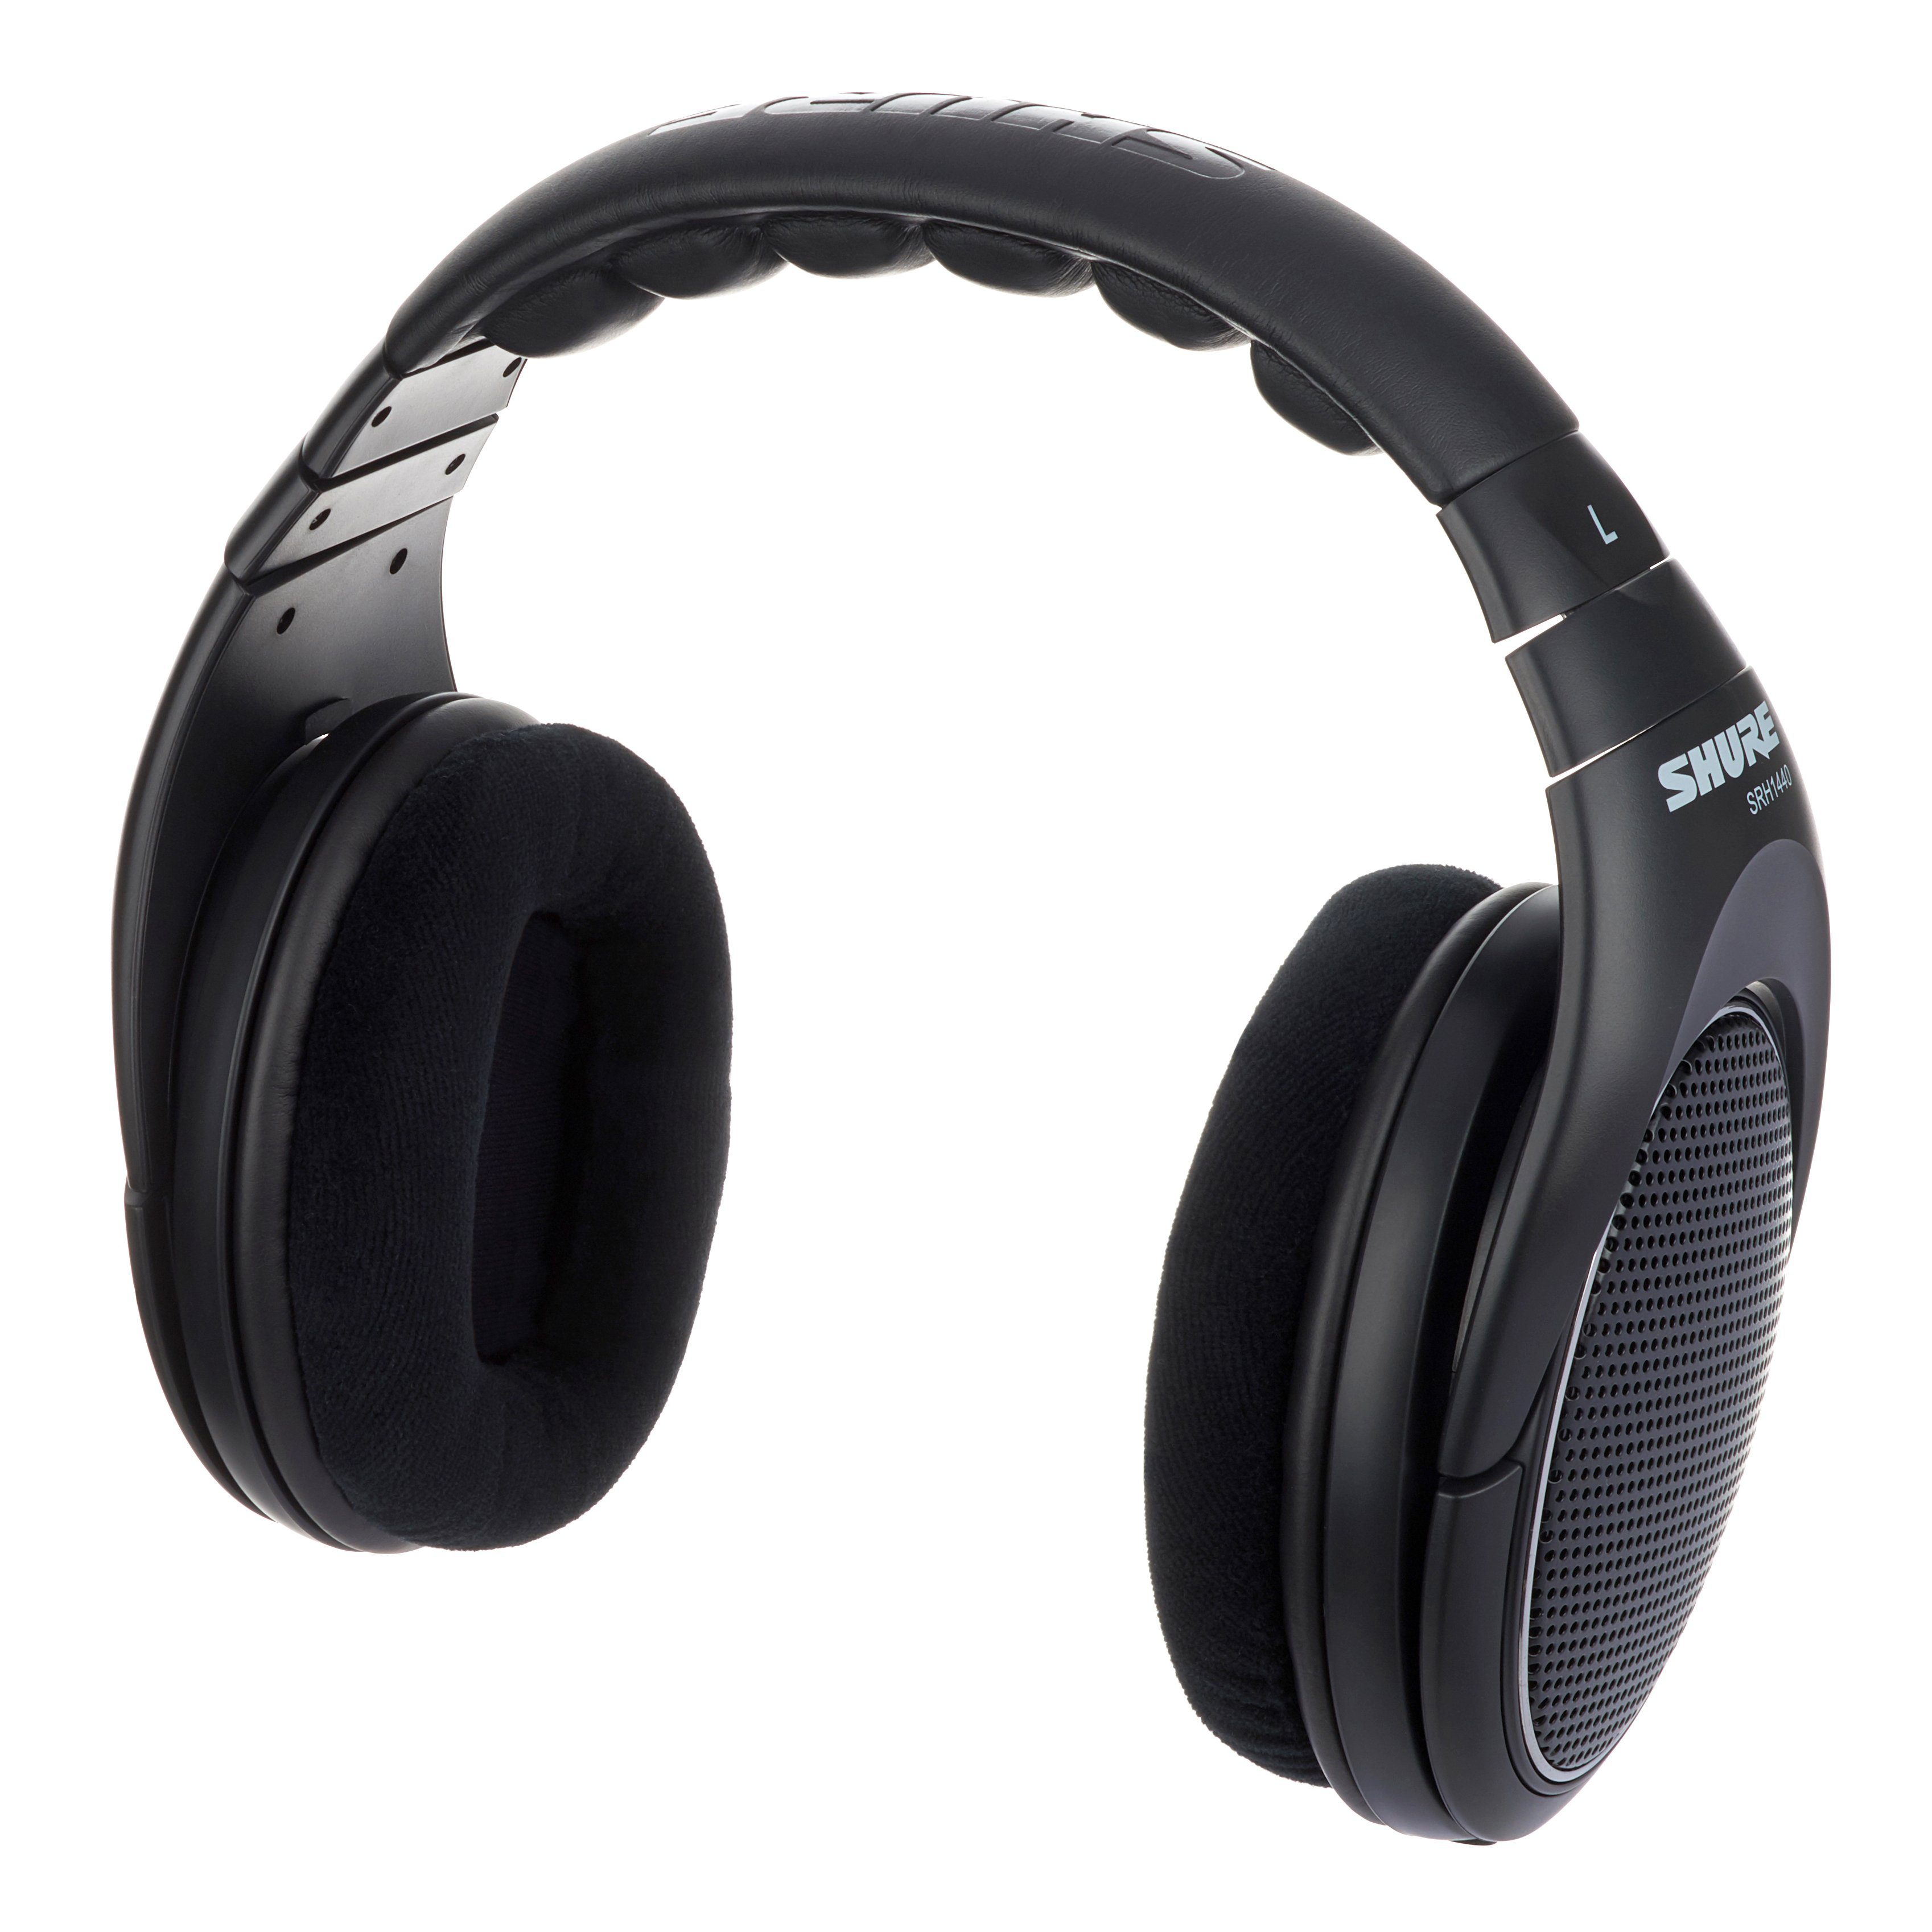 exceptionally natural sound with wide stereo image and precisely tailored frequency response Shure SRH1440 Professional Open-back Premium Headphones black detachable cable velour ear pads 